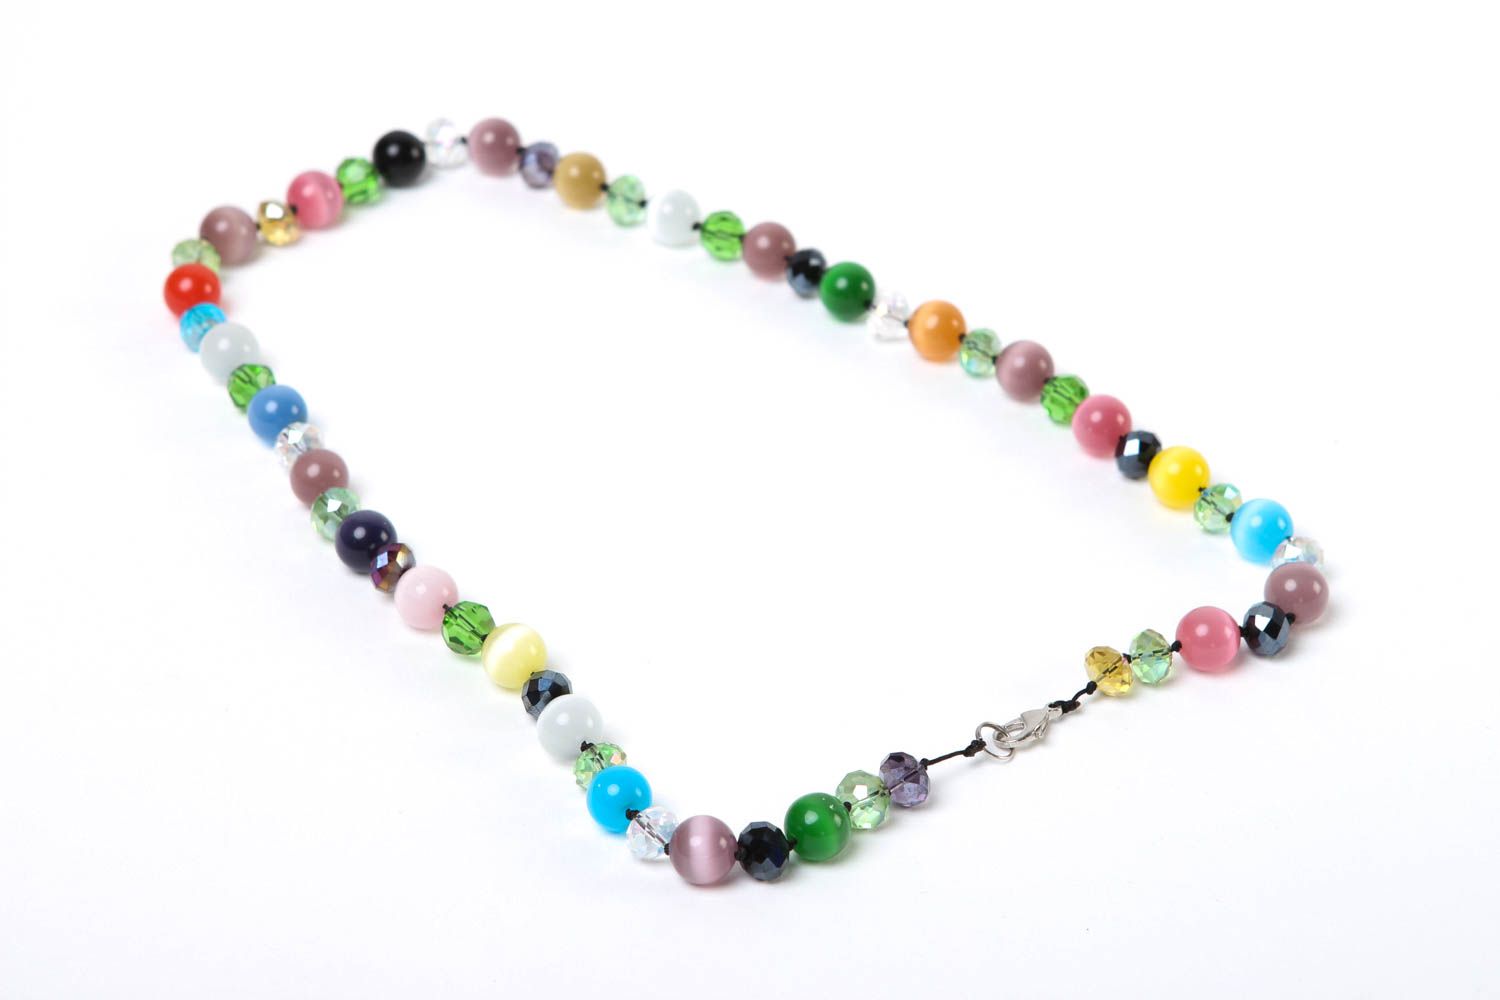 Handmade necklace designer jewelry stone necklace unusual necklace with beads photo 4